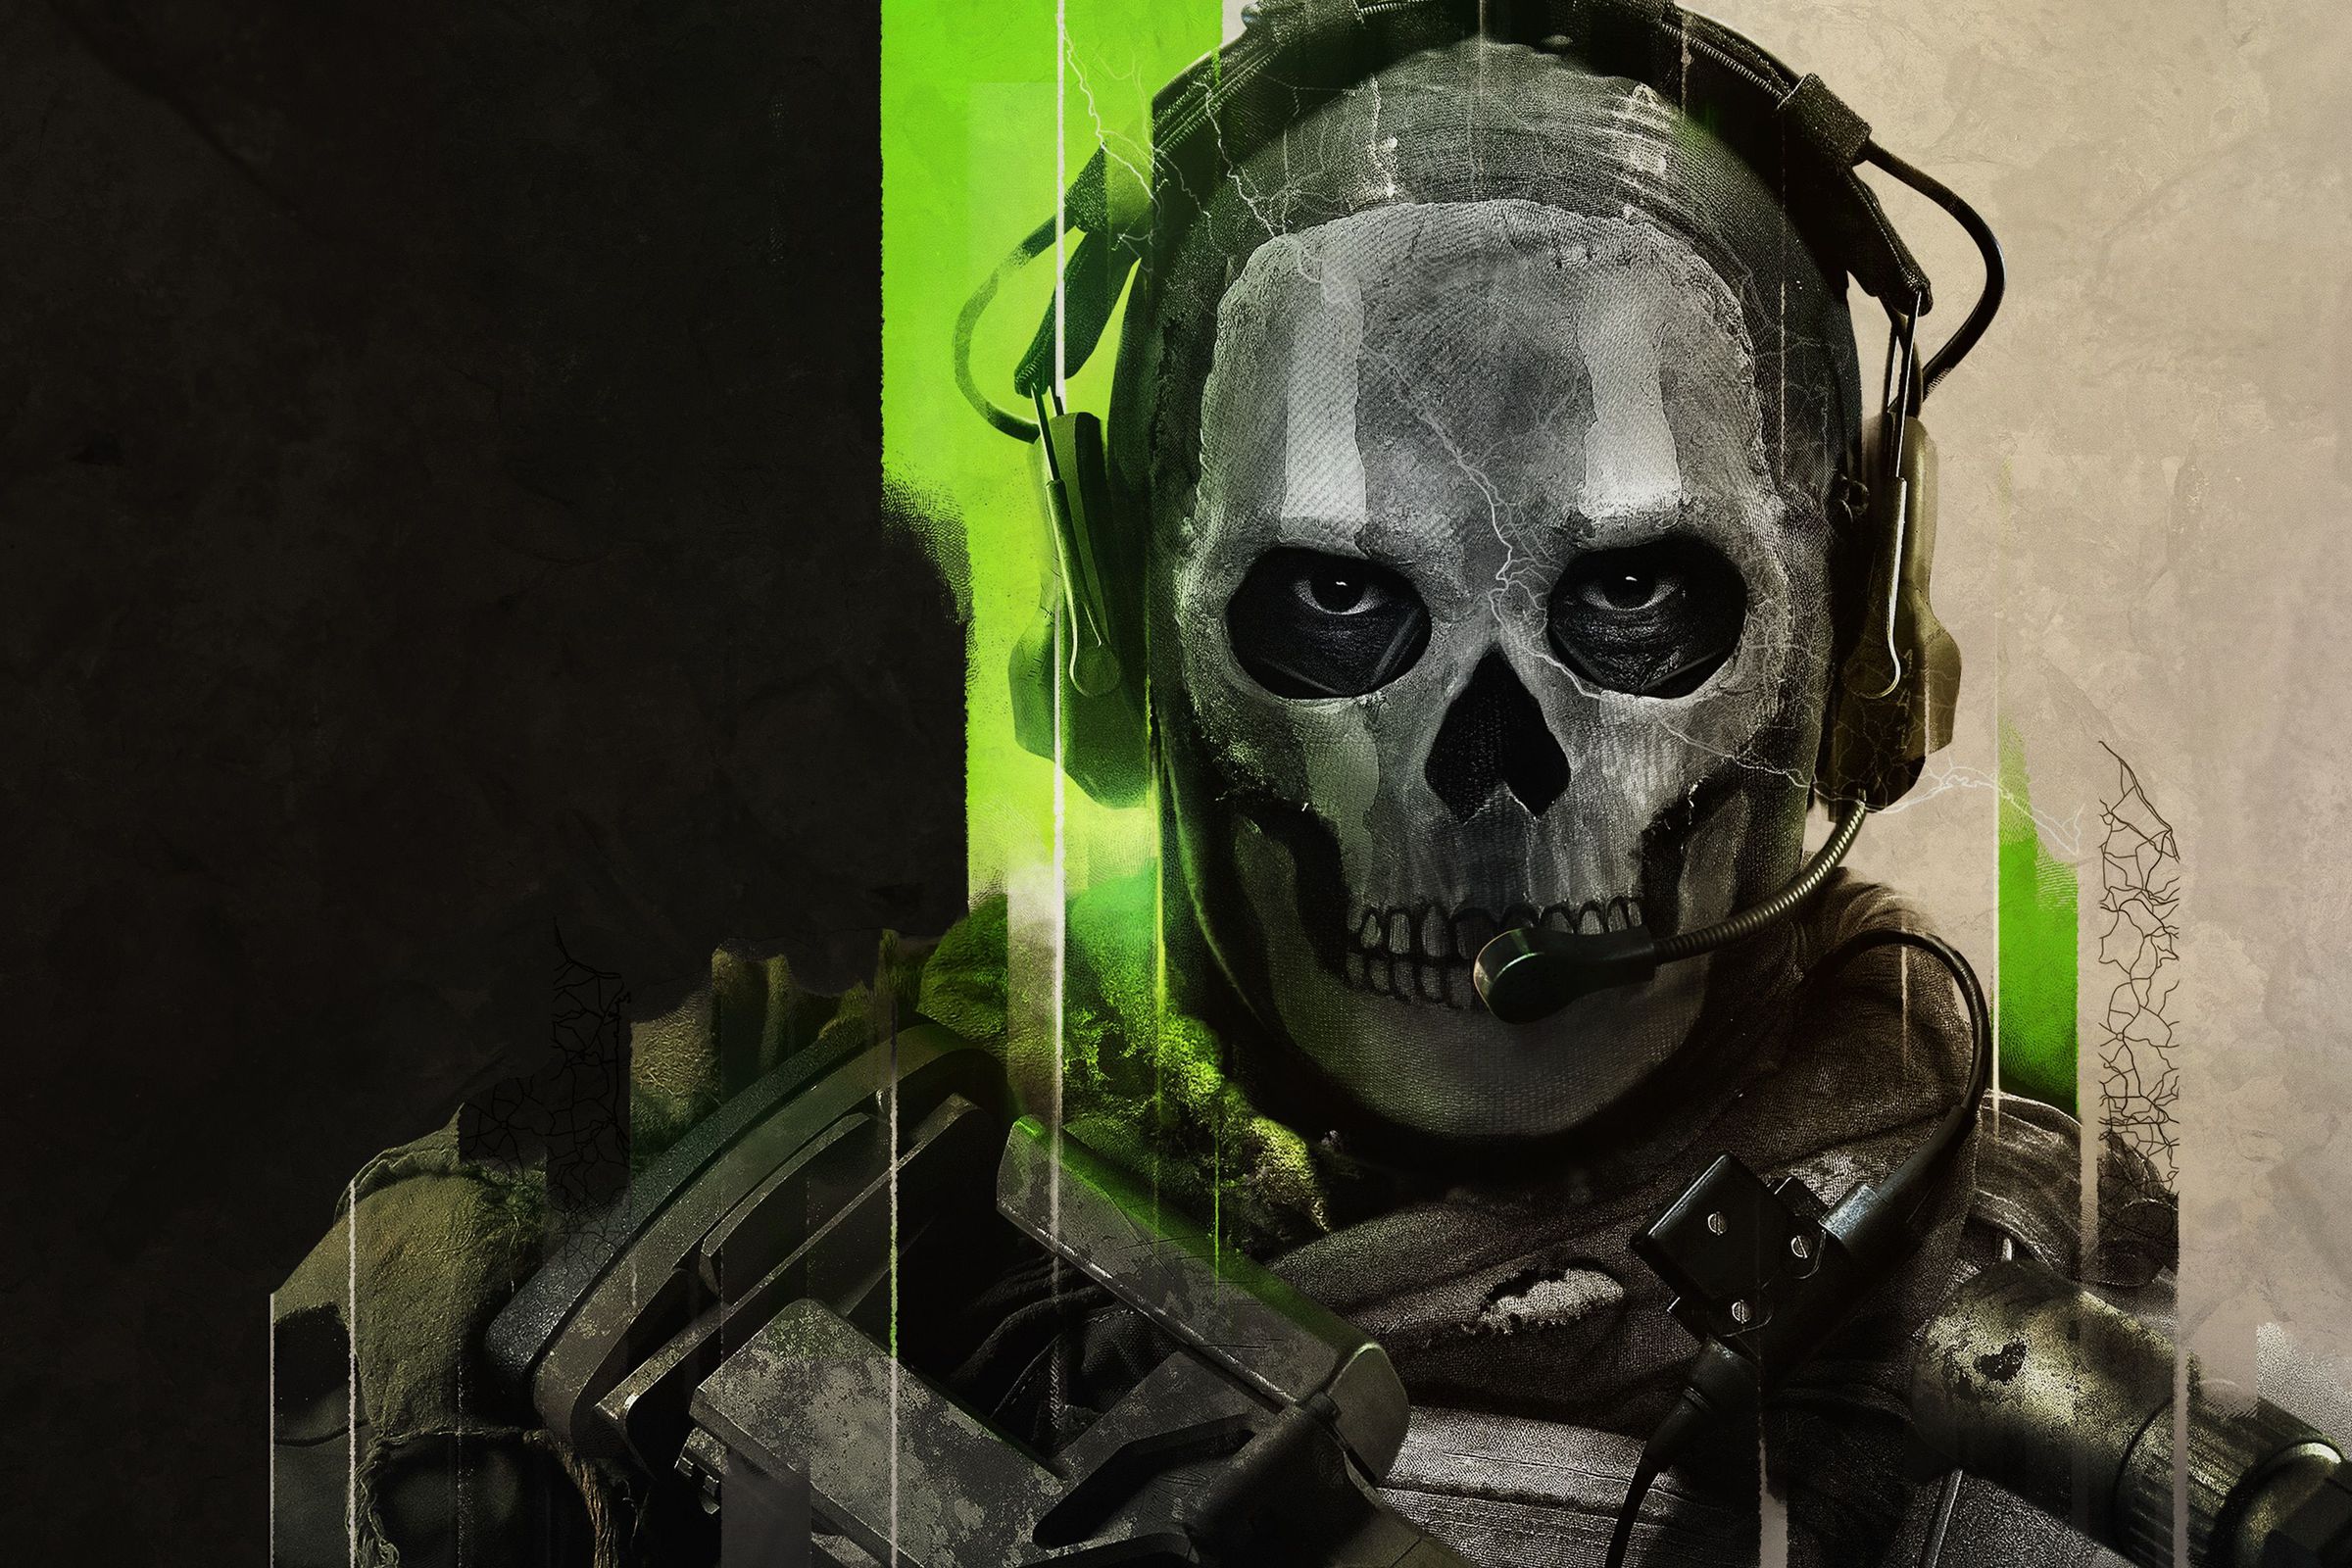 Illustration of a Call of Duty character from Modern Warfare II